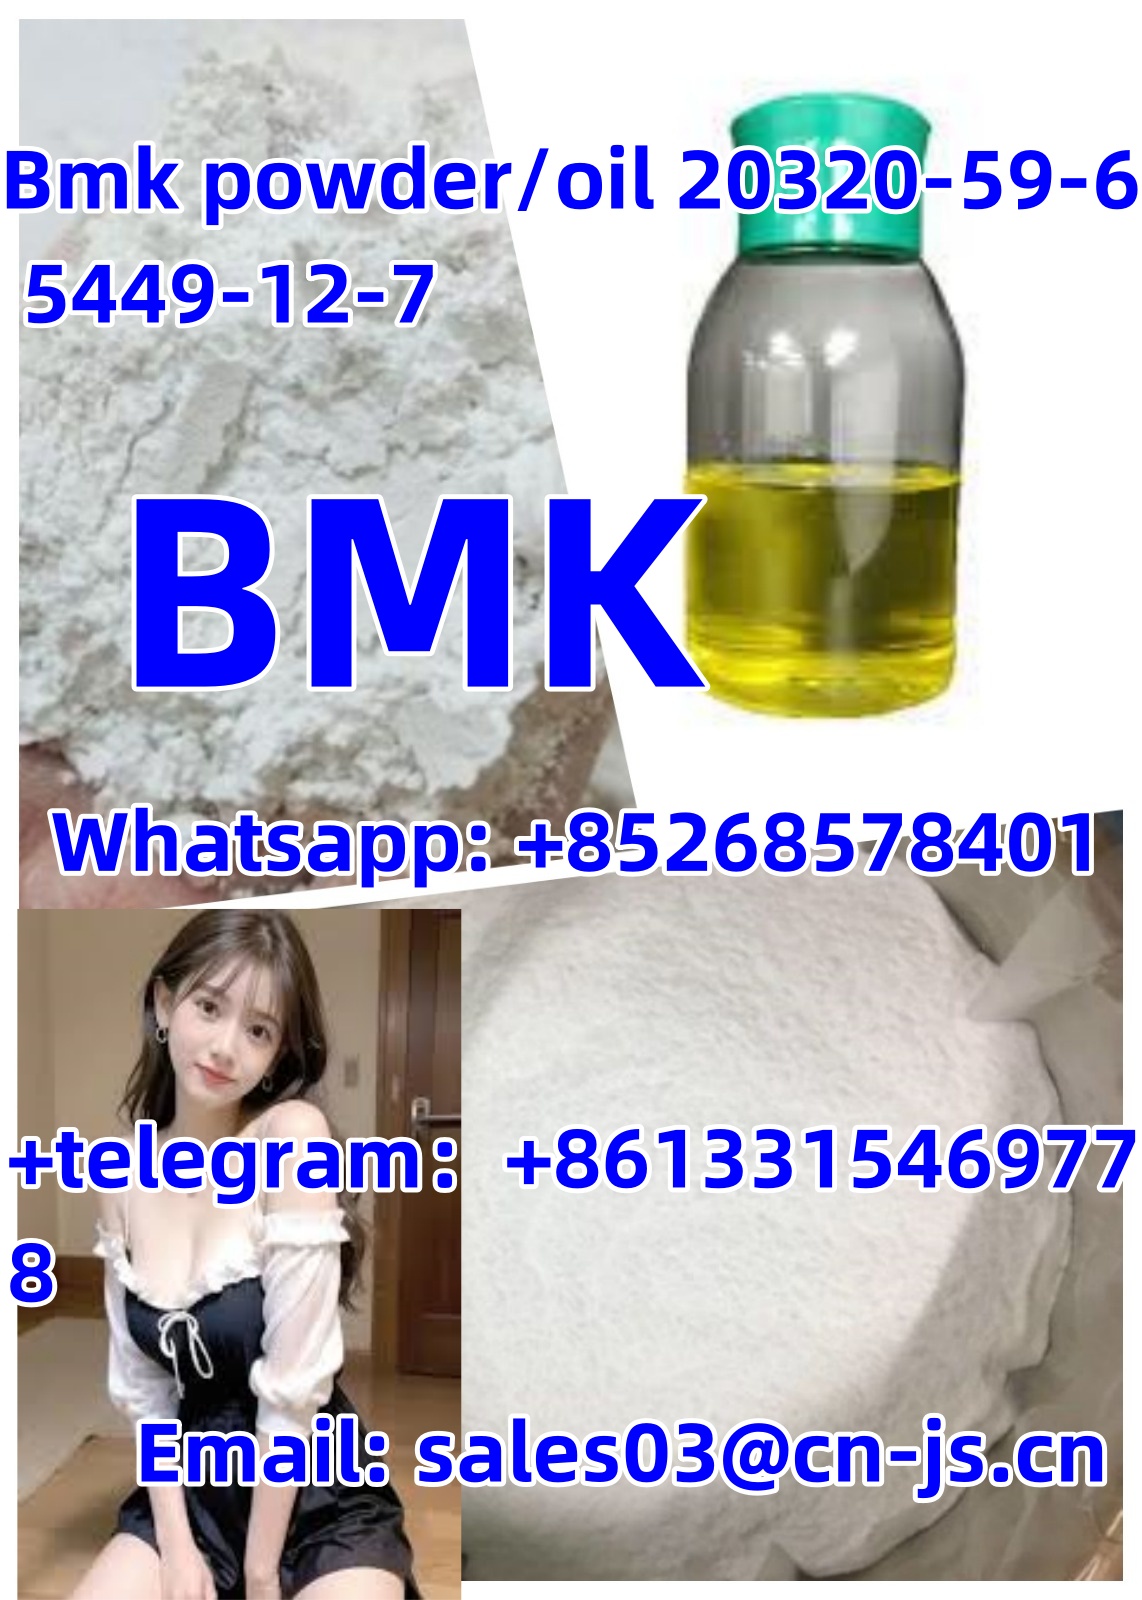 High Quality Bmk powder/oil 20320-59-6 5449-12-7,111,Pets,Free Classifieds,Post Free Ads,77traders.com